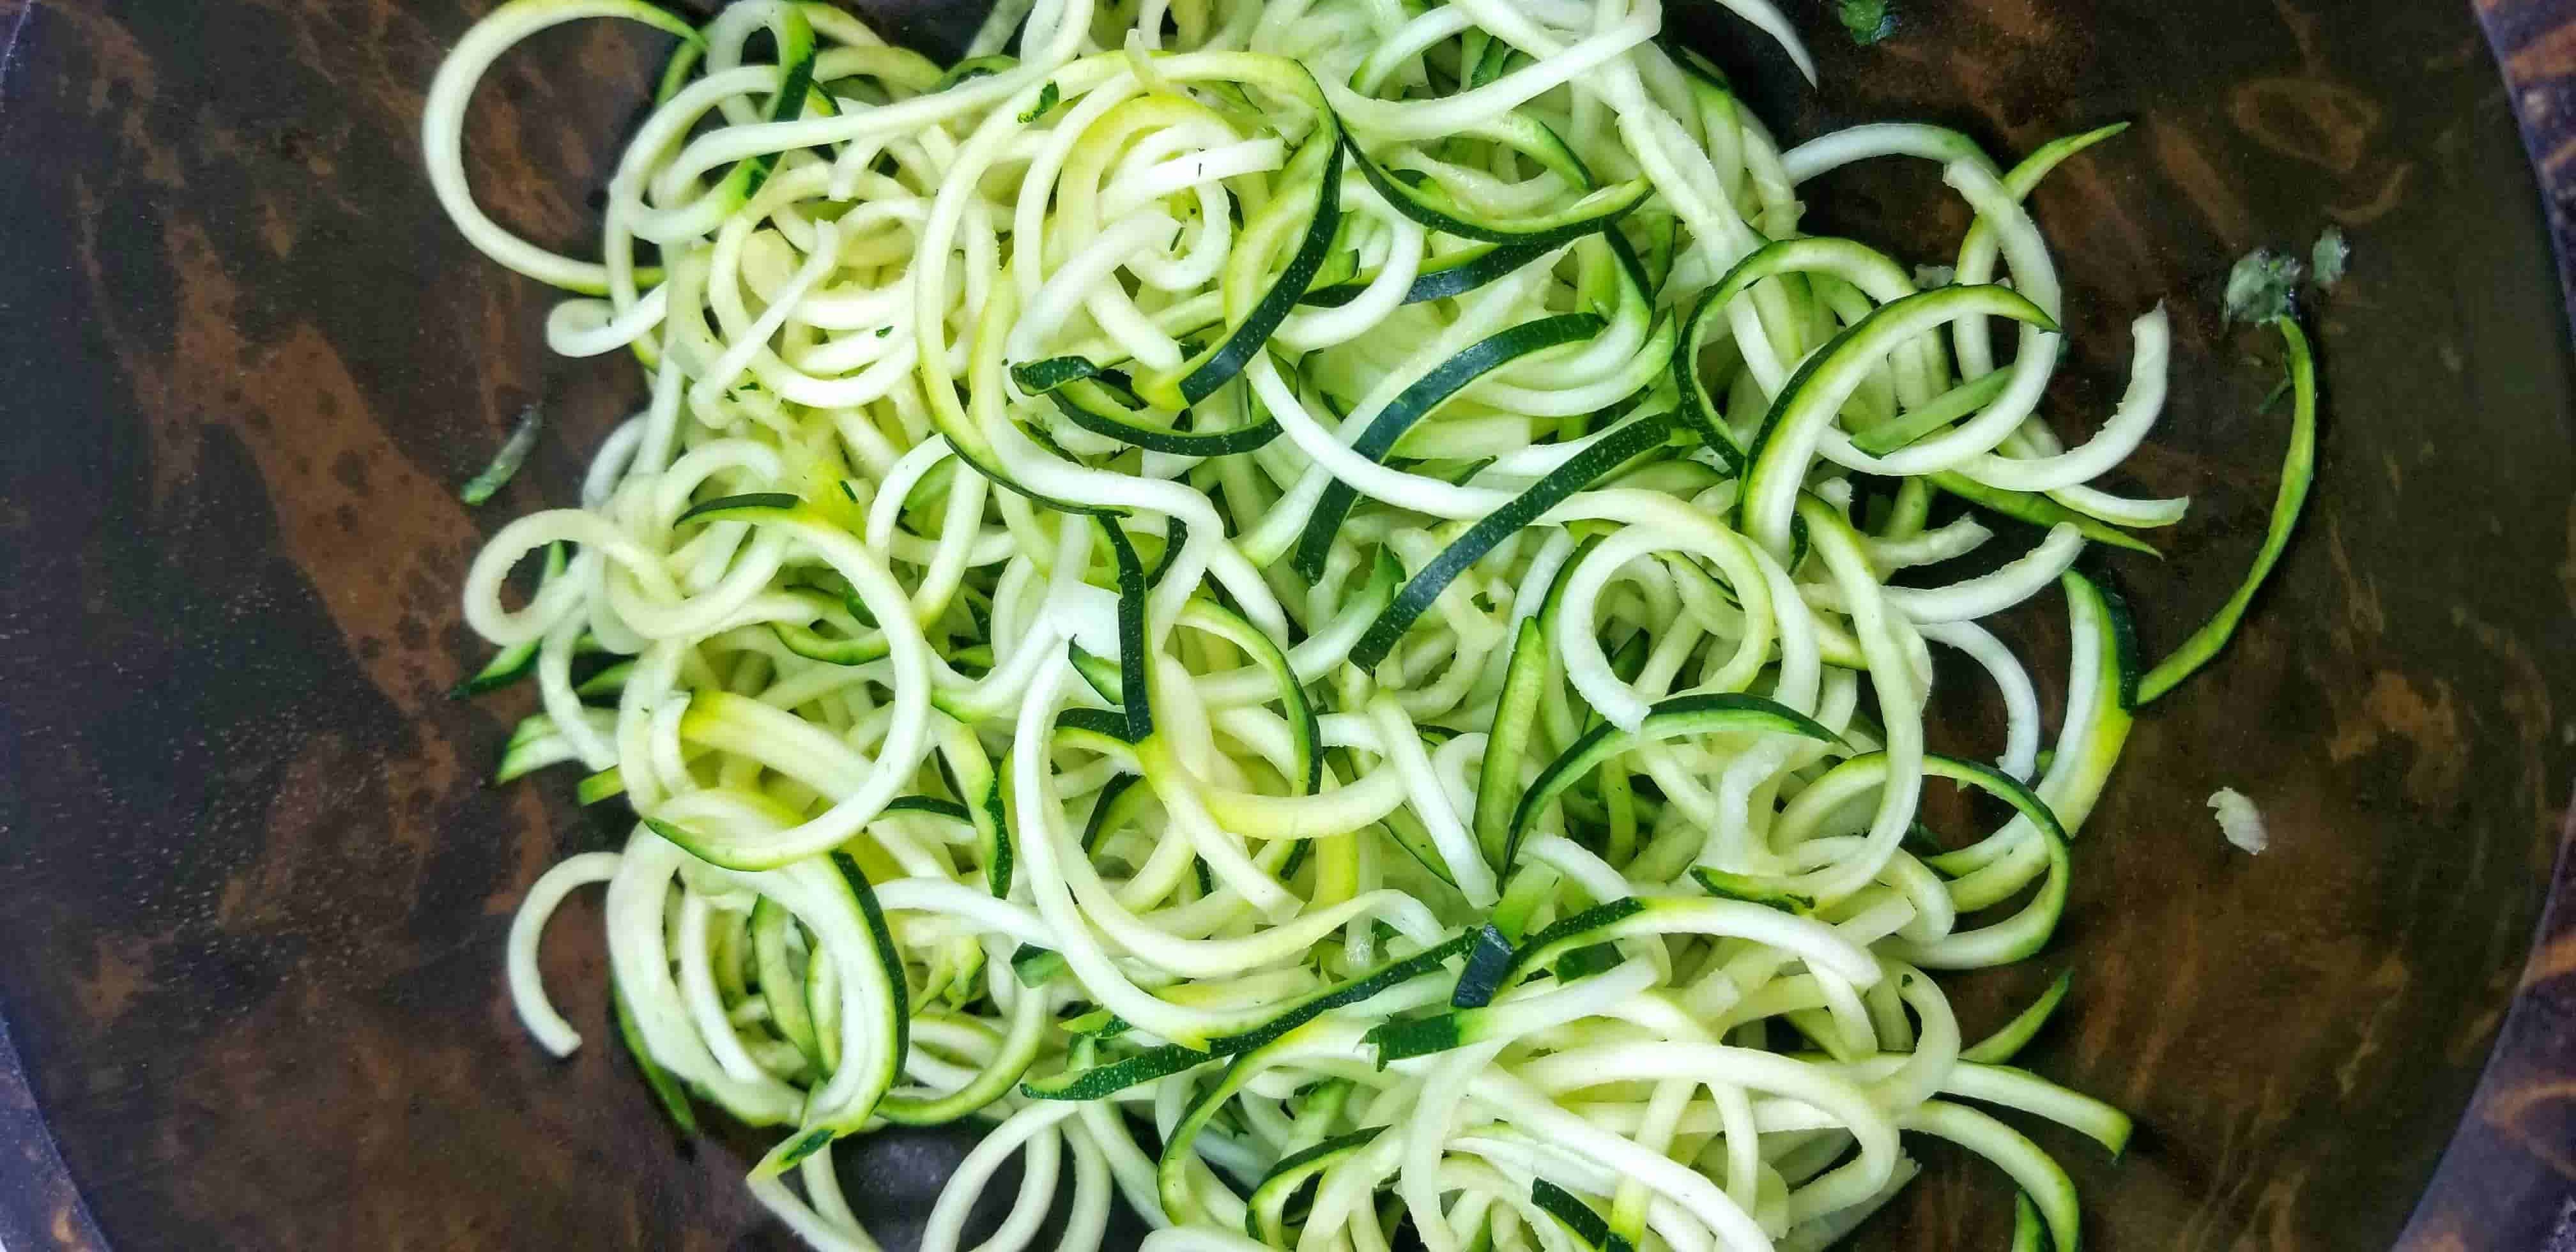 Zoodles after running zucchini through a zoodle maker